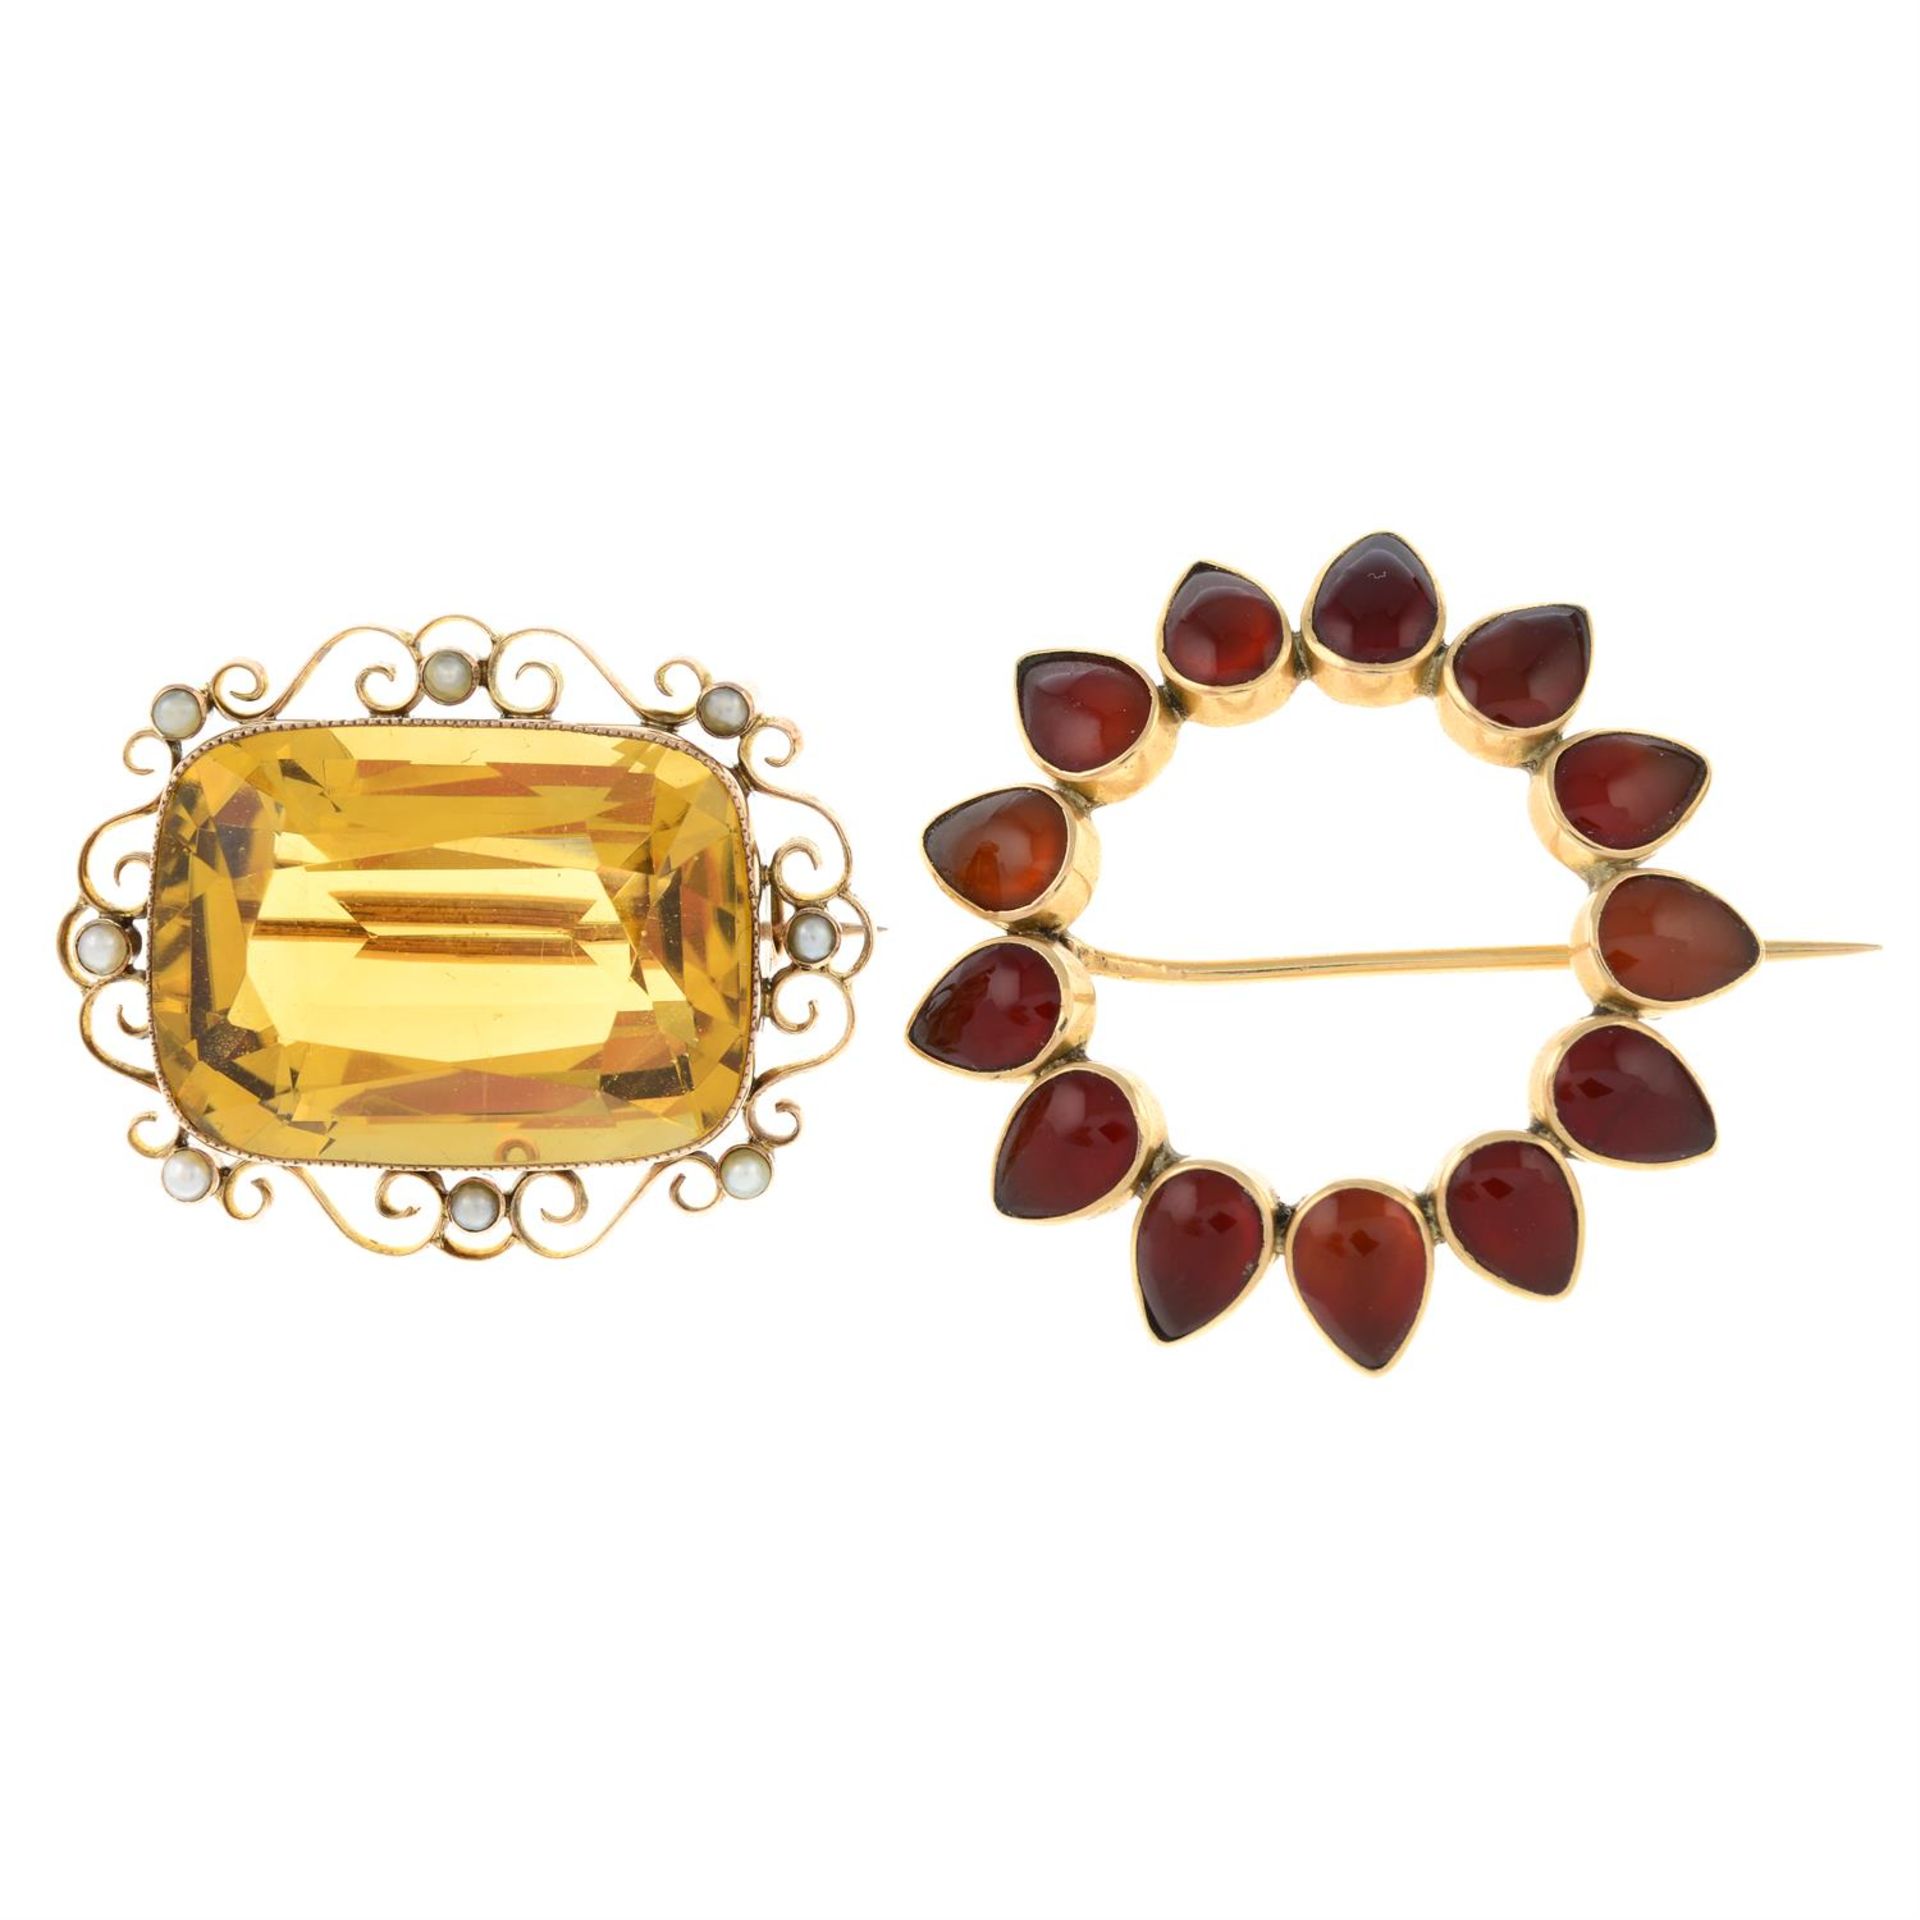 An early 20th century 9ct gold citrine and split pearl brooch together with an early 20th century